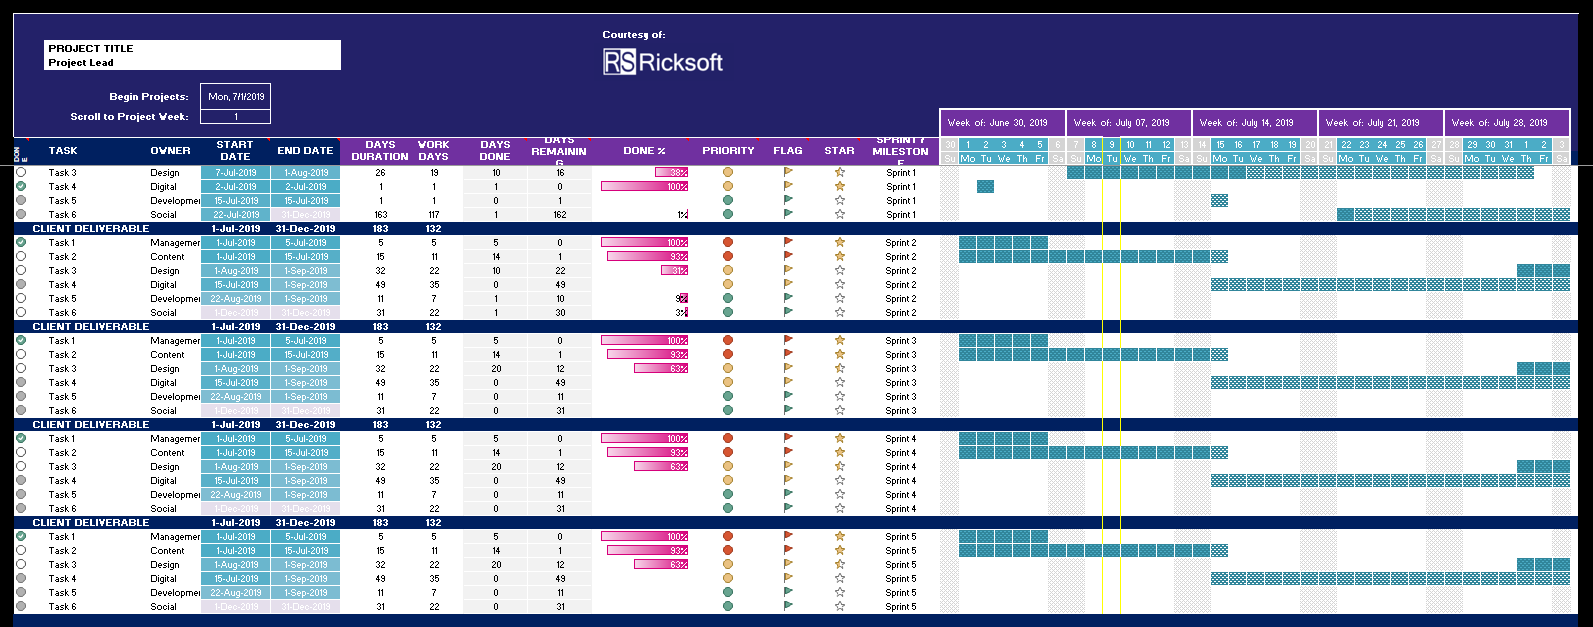 Excel Project Plan Template Microsoft from www.ricksoft-inc.com